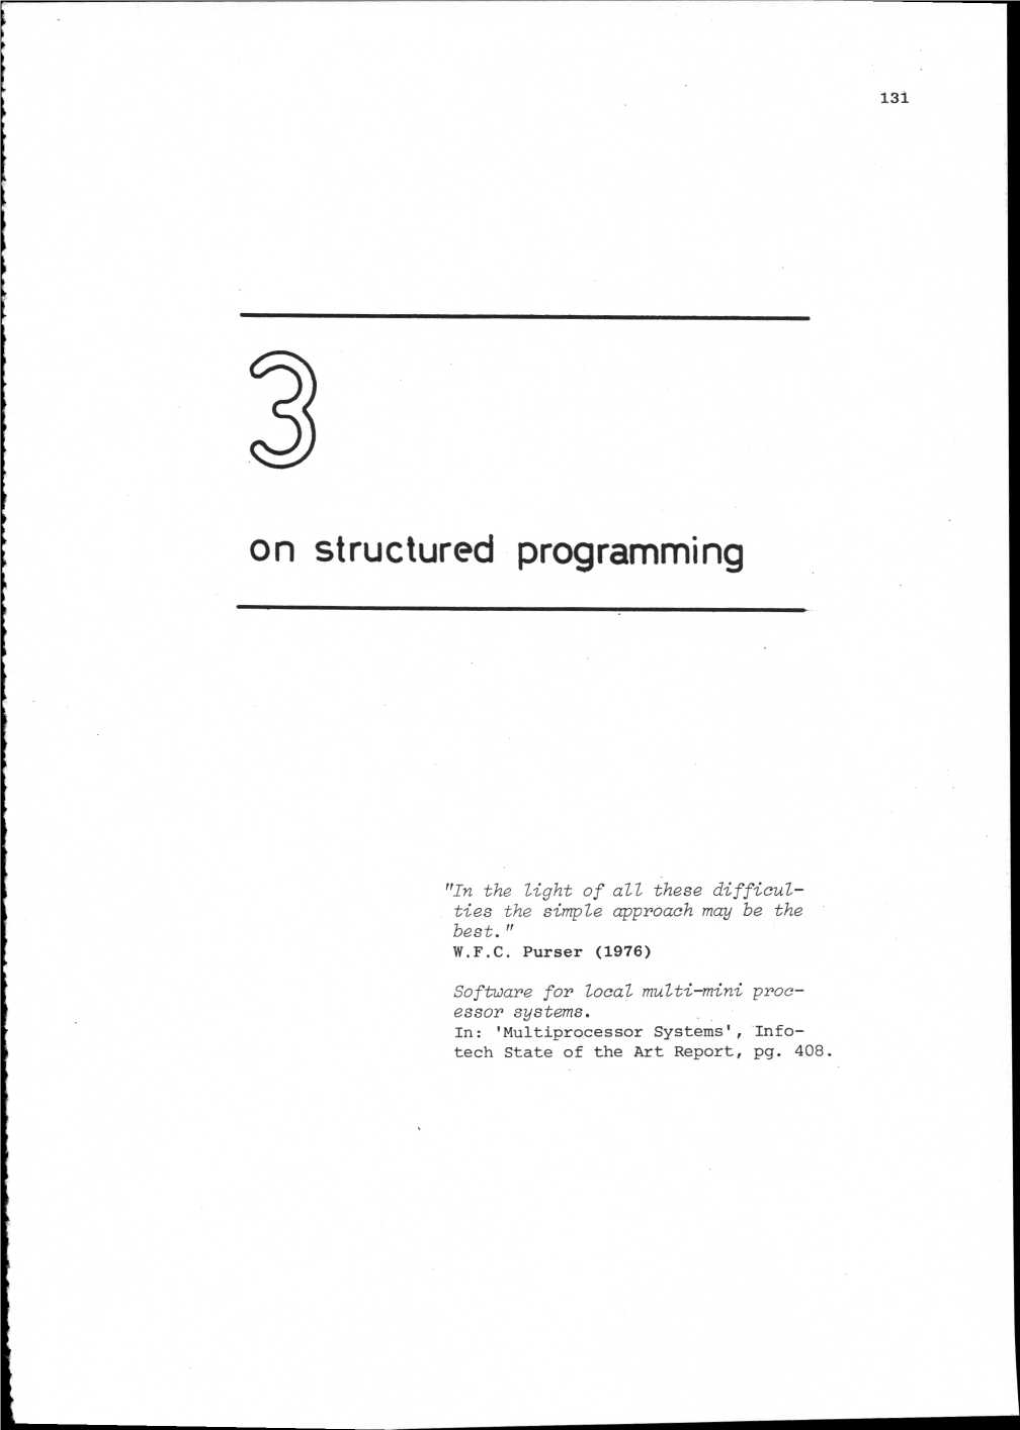 Chapter 3, on Structured Programming